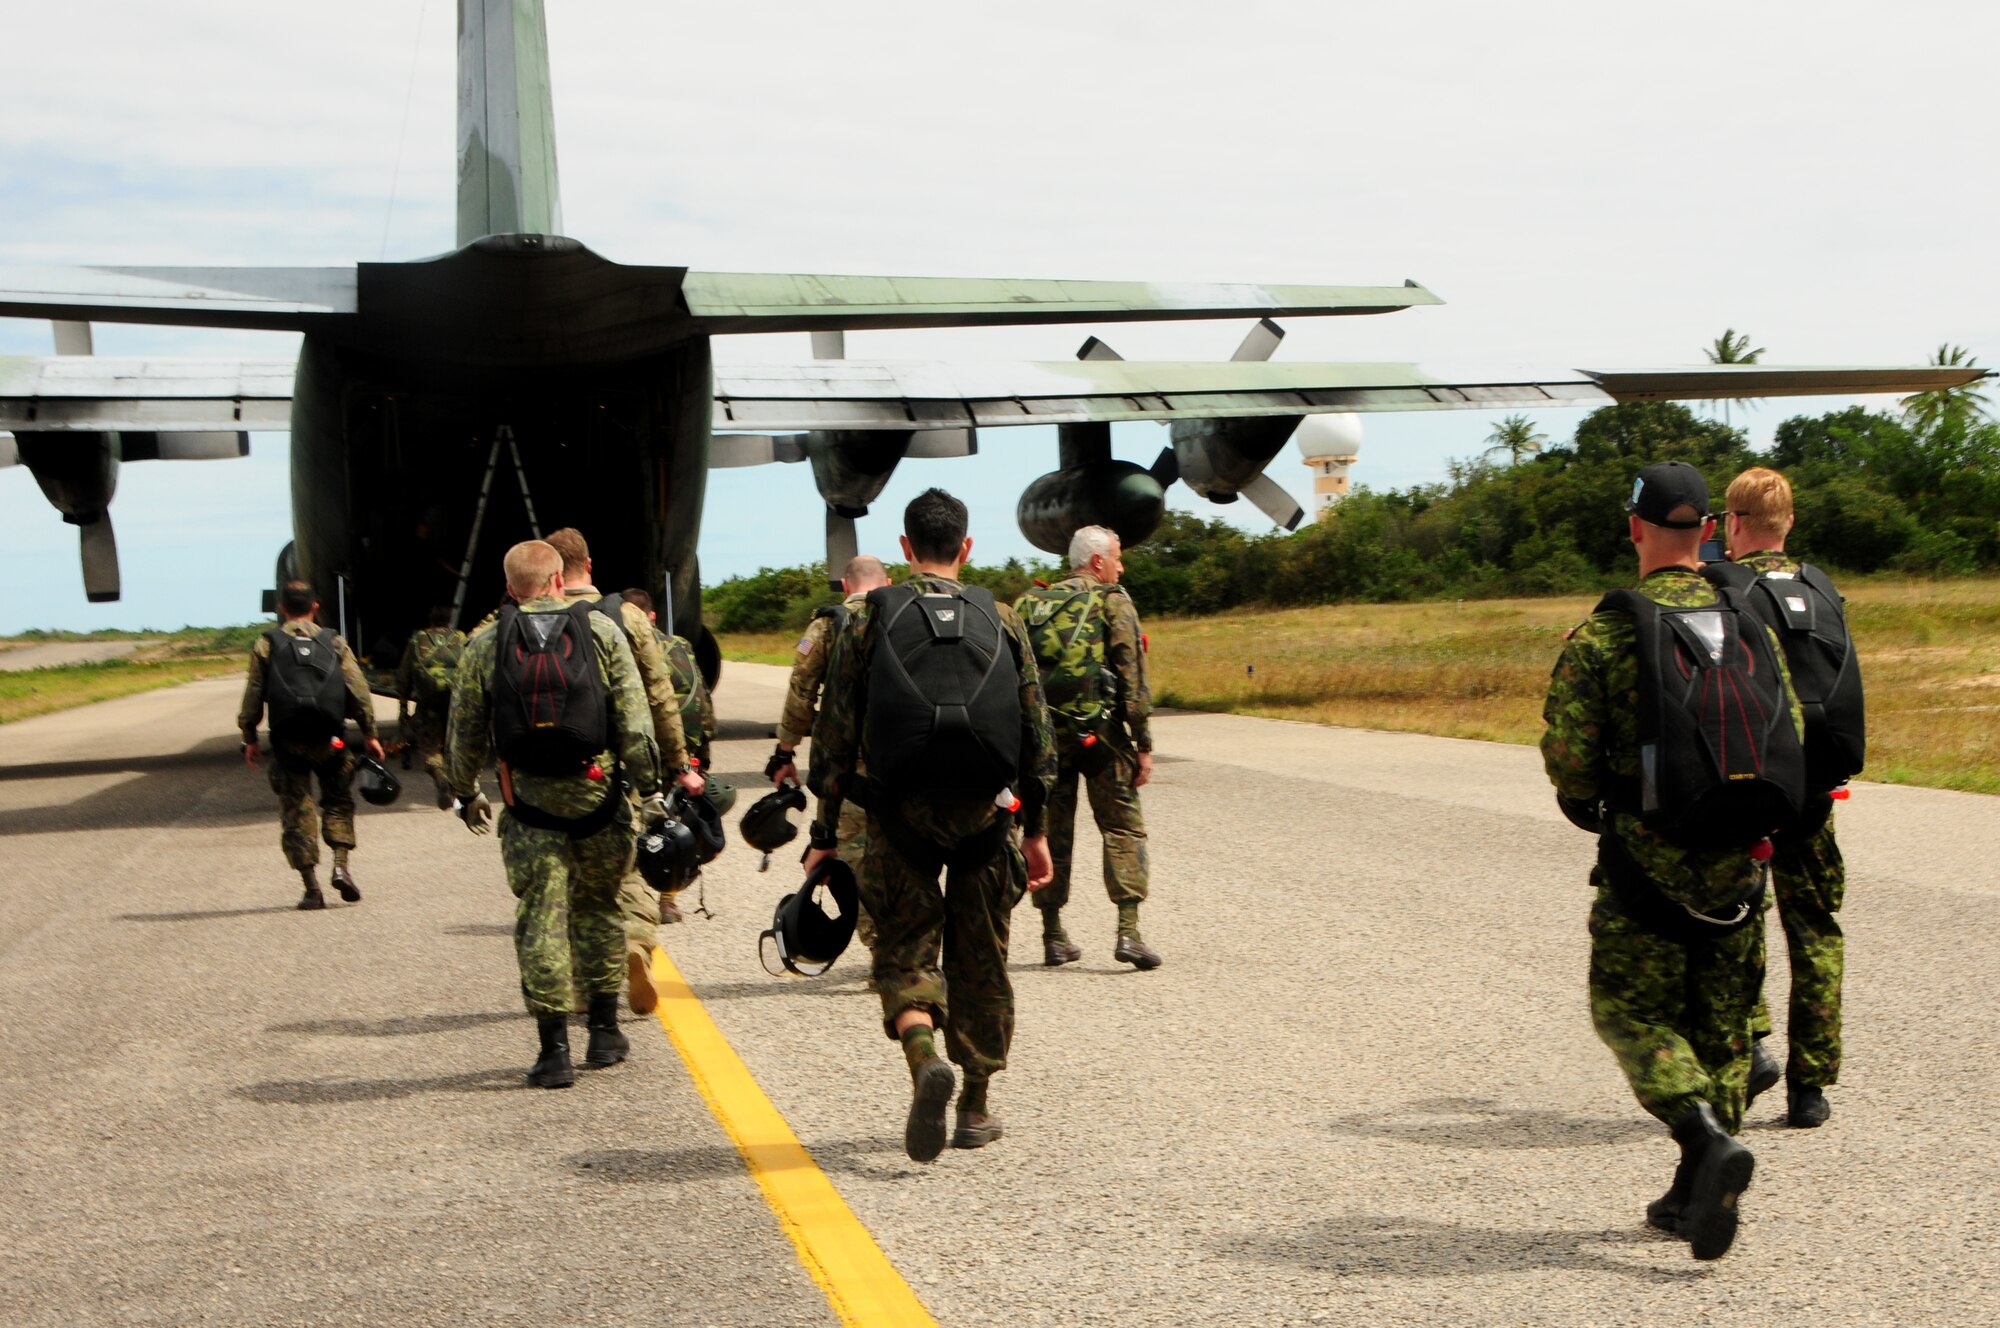 Brazilian, Canadian and U.S. pararescuemen prepare to board a Brazilian C-130E Hercules during CRUZEX at Natal Air Base, Natal, Brazil, Nov. 7, 2013. Exercises such as CRUZEX are designed and led by a host nation, partnering nations receive training opportunities that are beneficial to the entire region. (U.S. Air Force photo by Senior Airman Camilla Elizeu/Released)